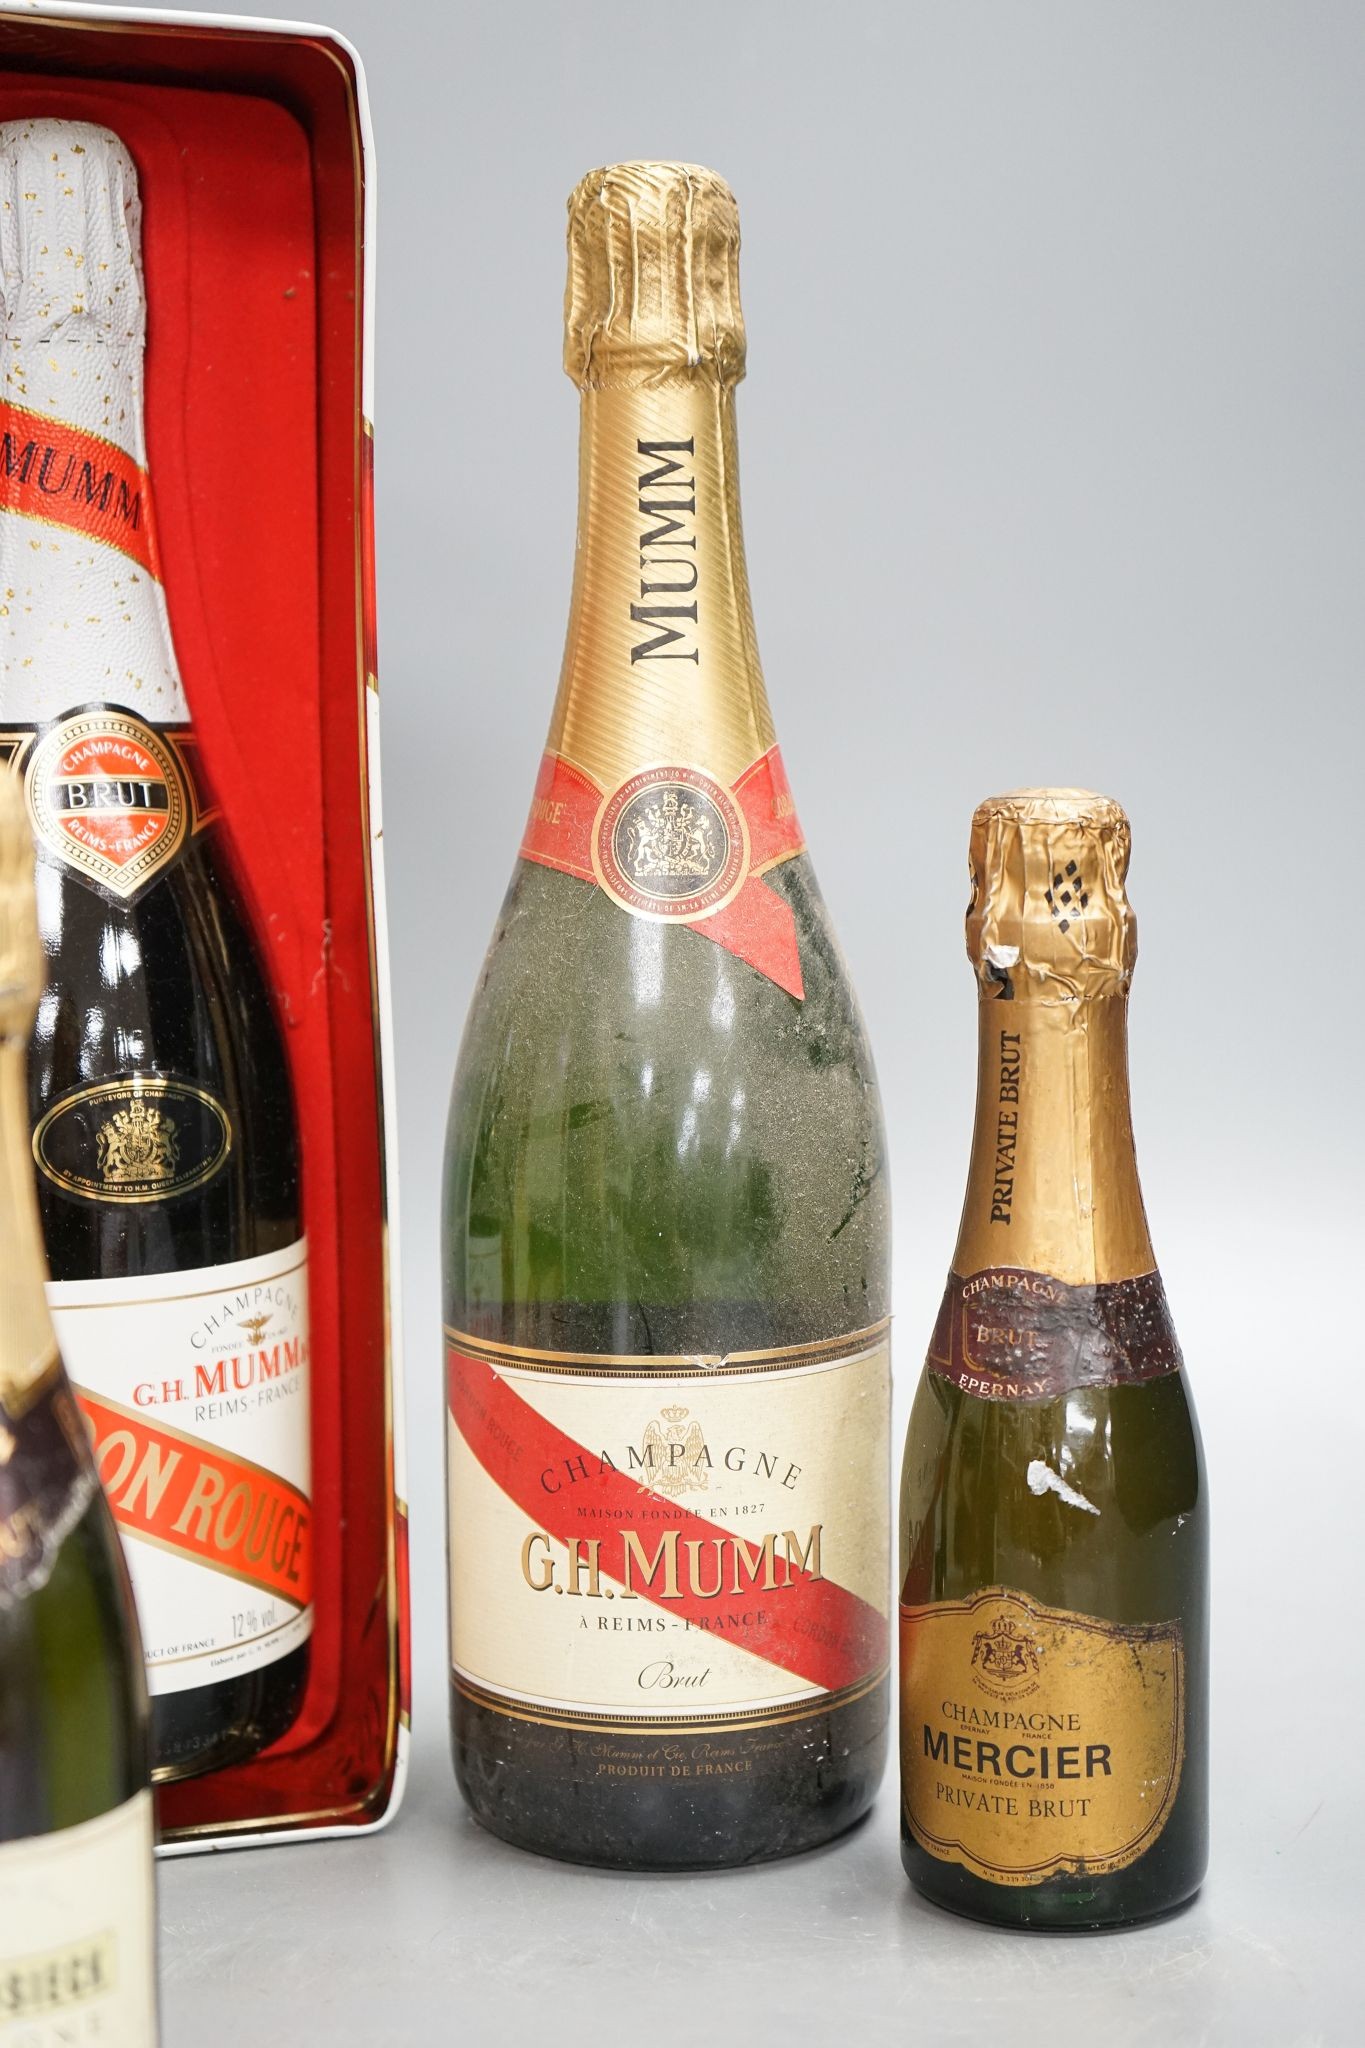 Two bottles of Mumm champagne and two small bottles of champagne